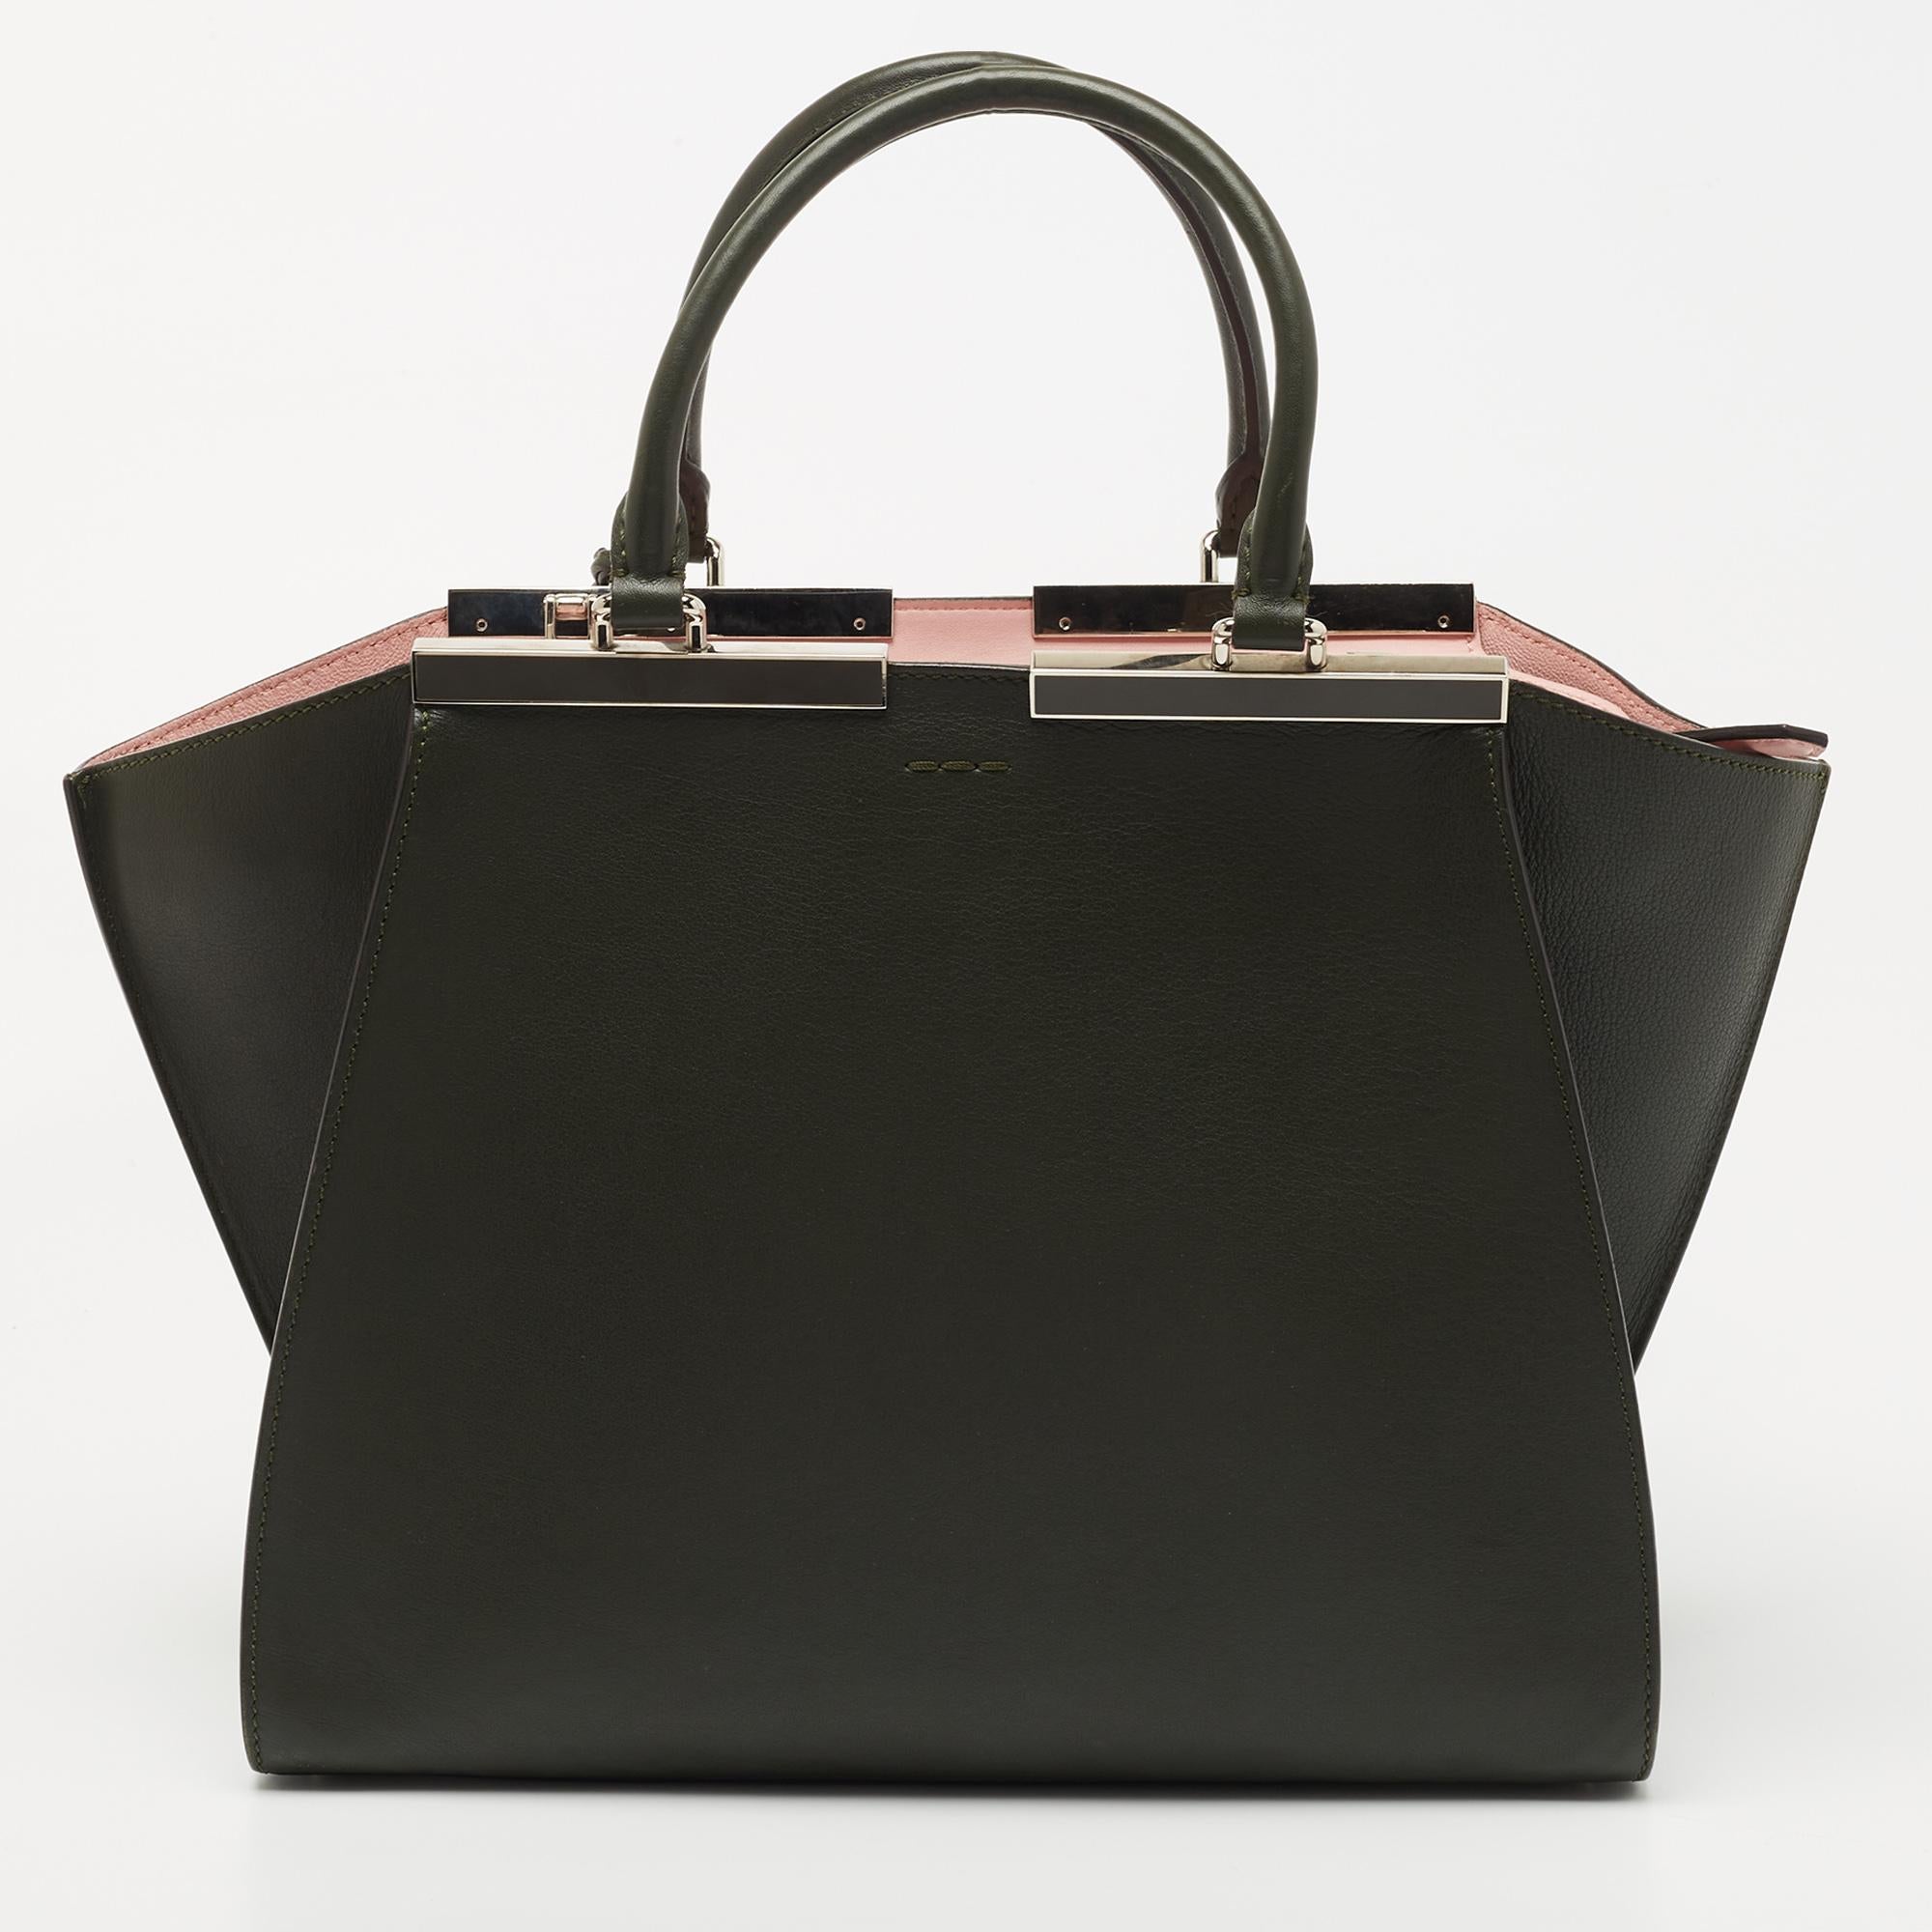 Fendi's 3Jours tote is one of the most iconic designs from the label, and it still continues to receive the love of women around the world. Crafted from leather, this tote features double handles, a shoulder strap, and a brand signature on the top